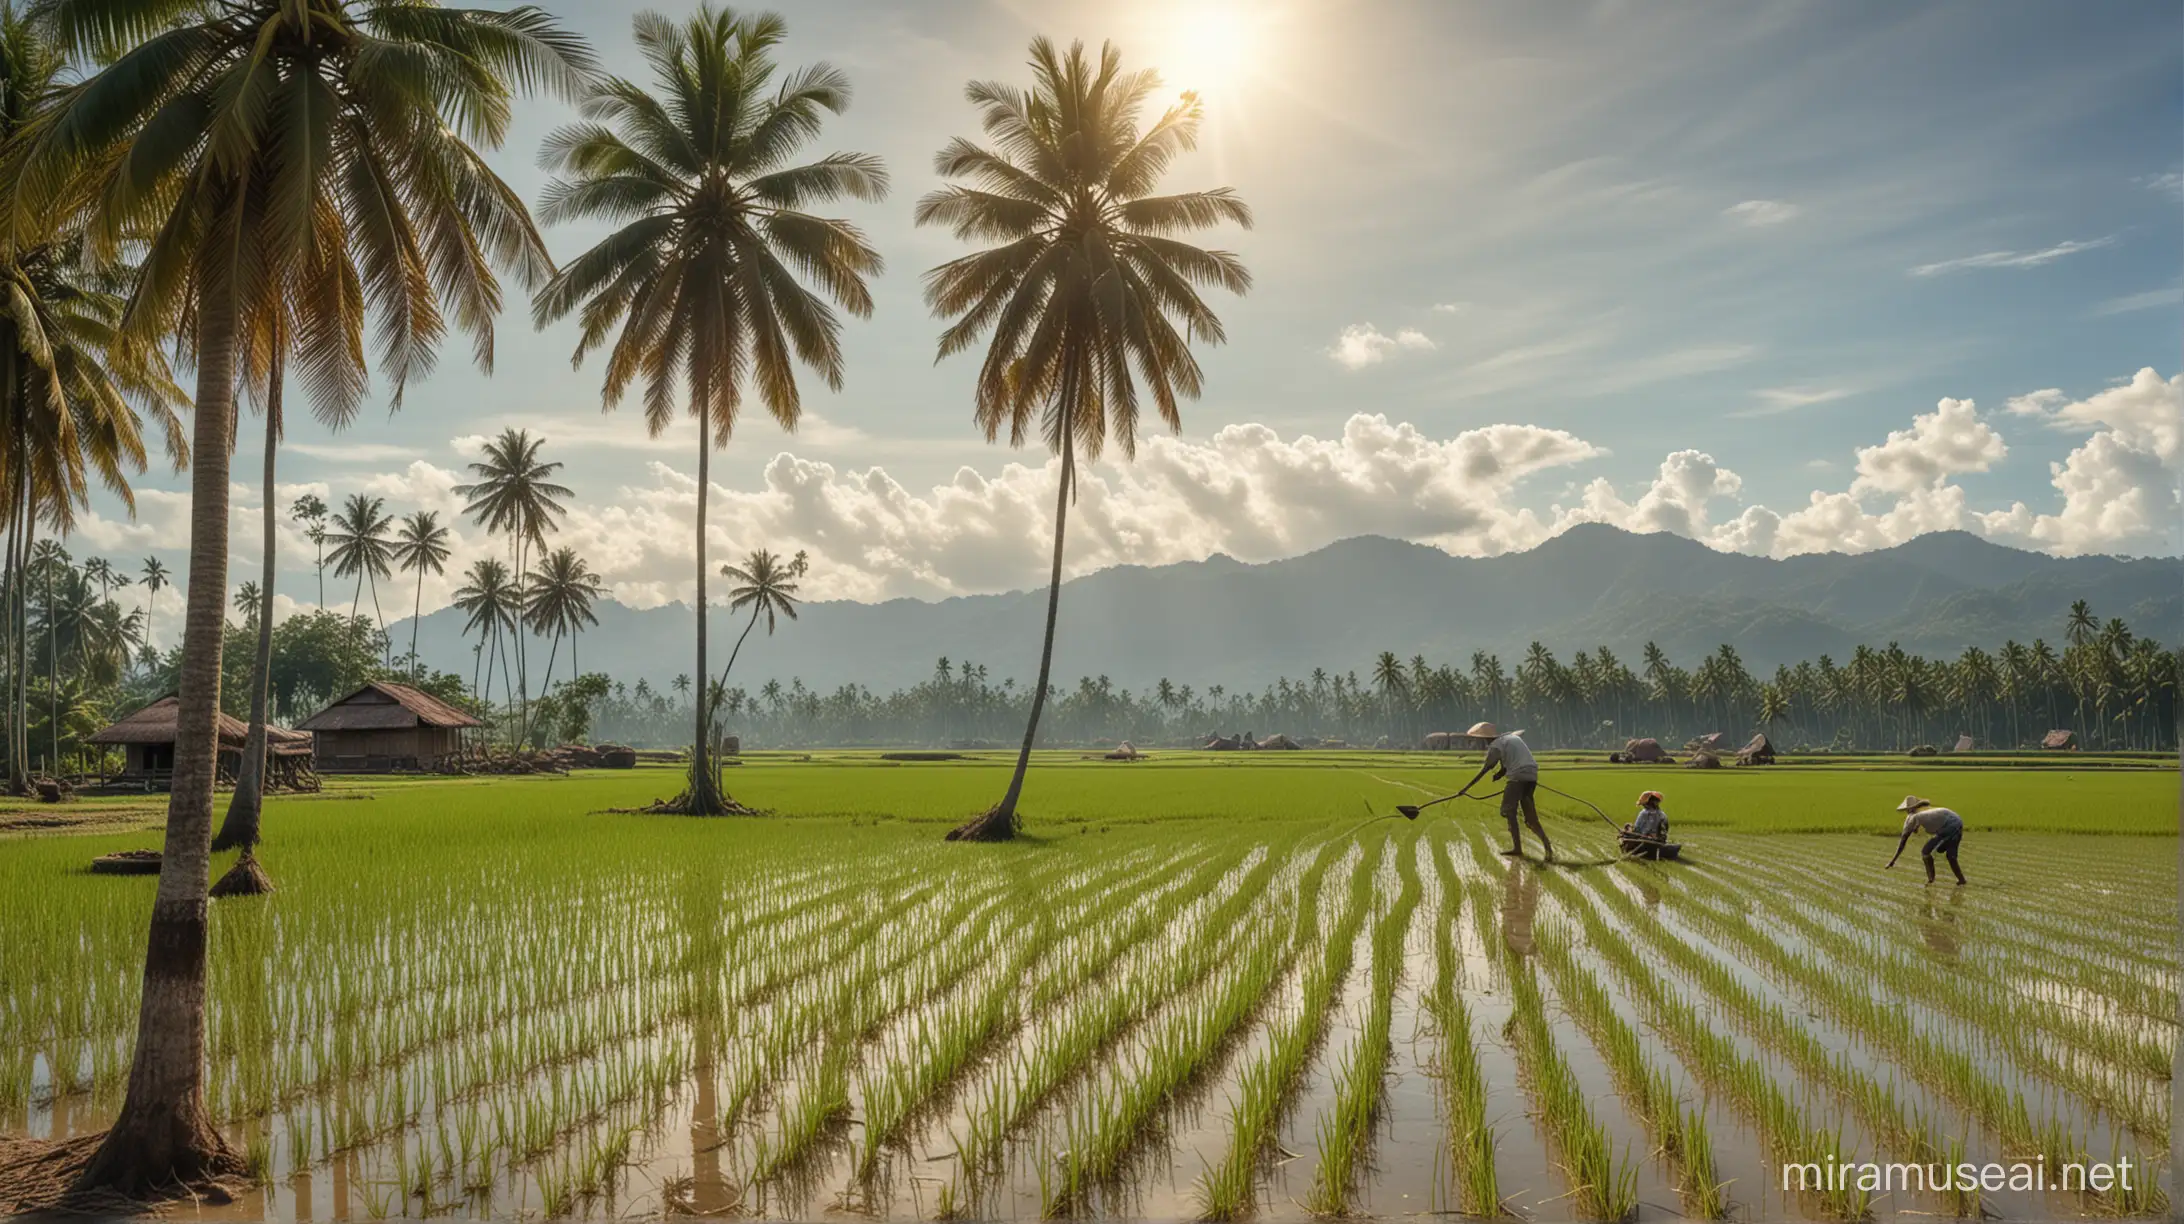 Indonesian Farmer Planting Rice Amidst Towering Coconut Trees under Bright Sunlight